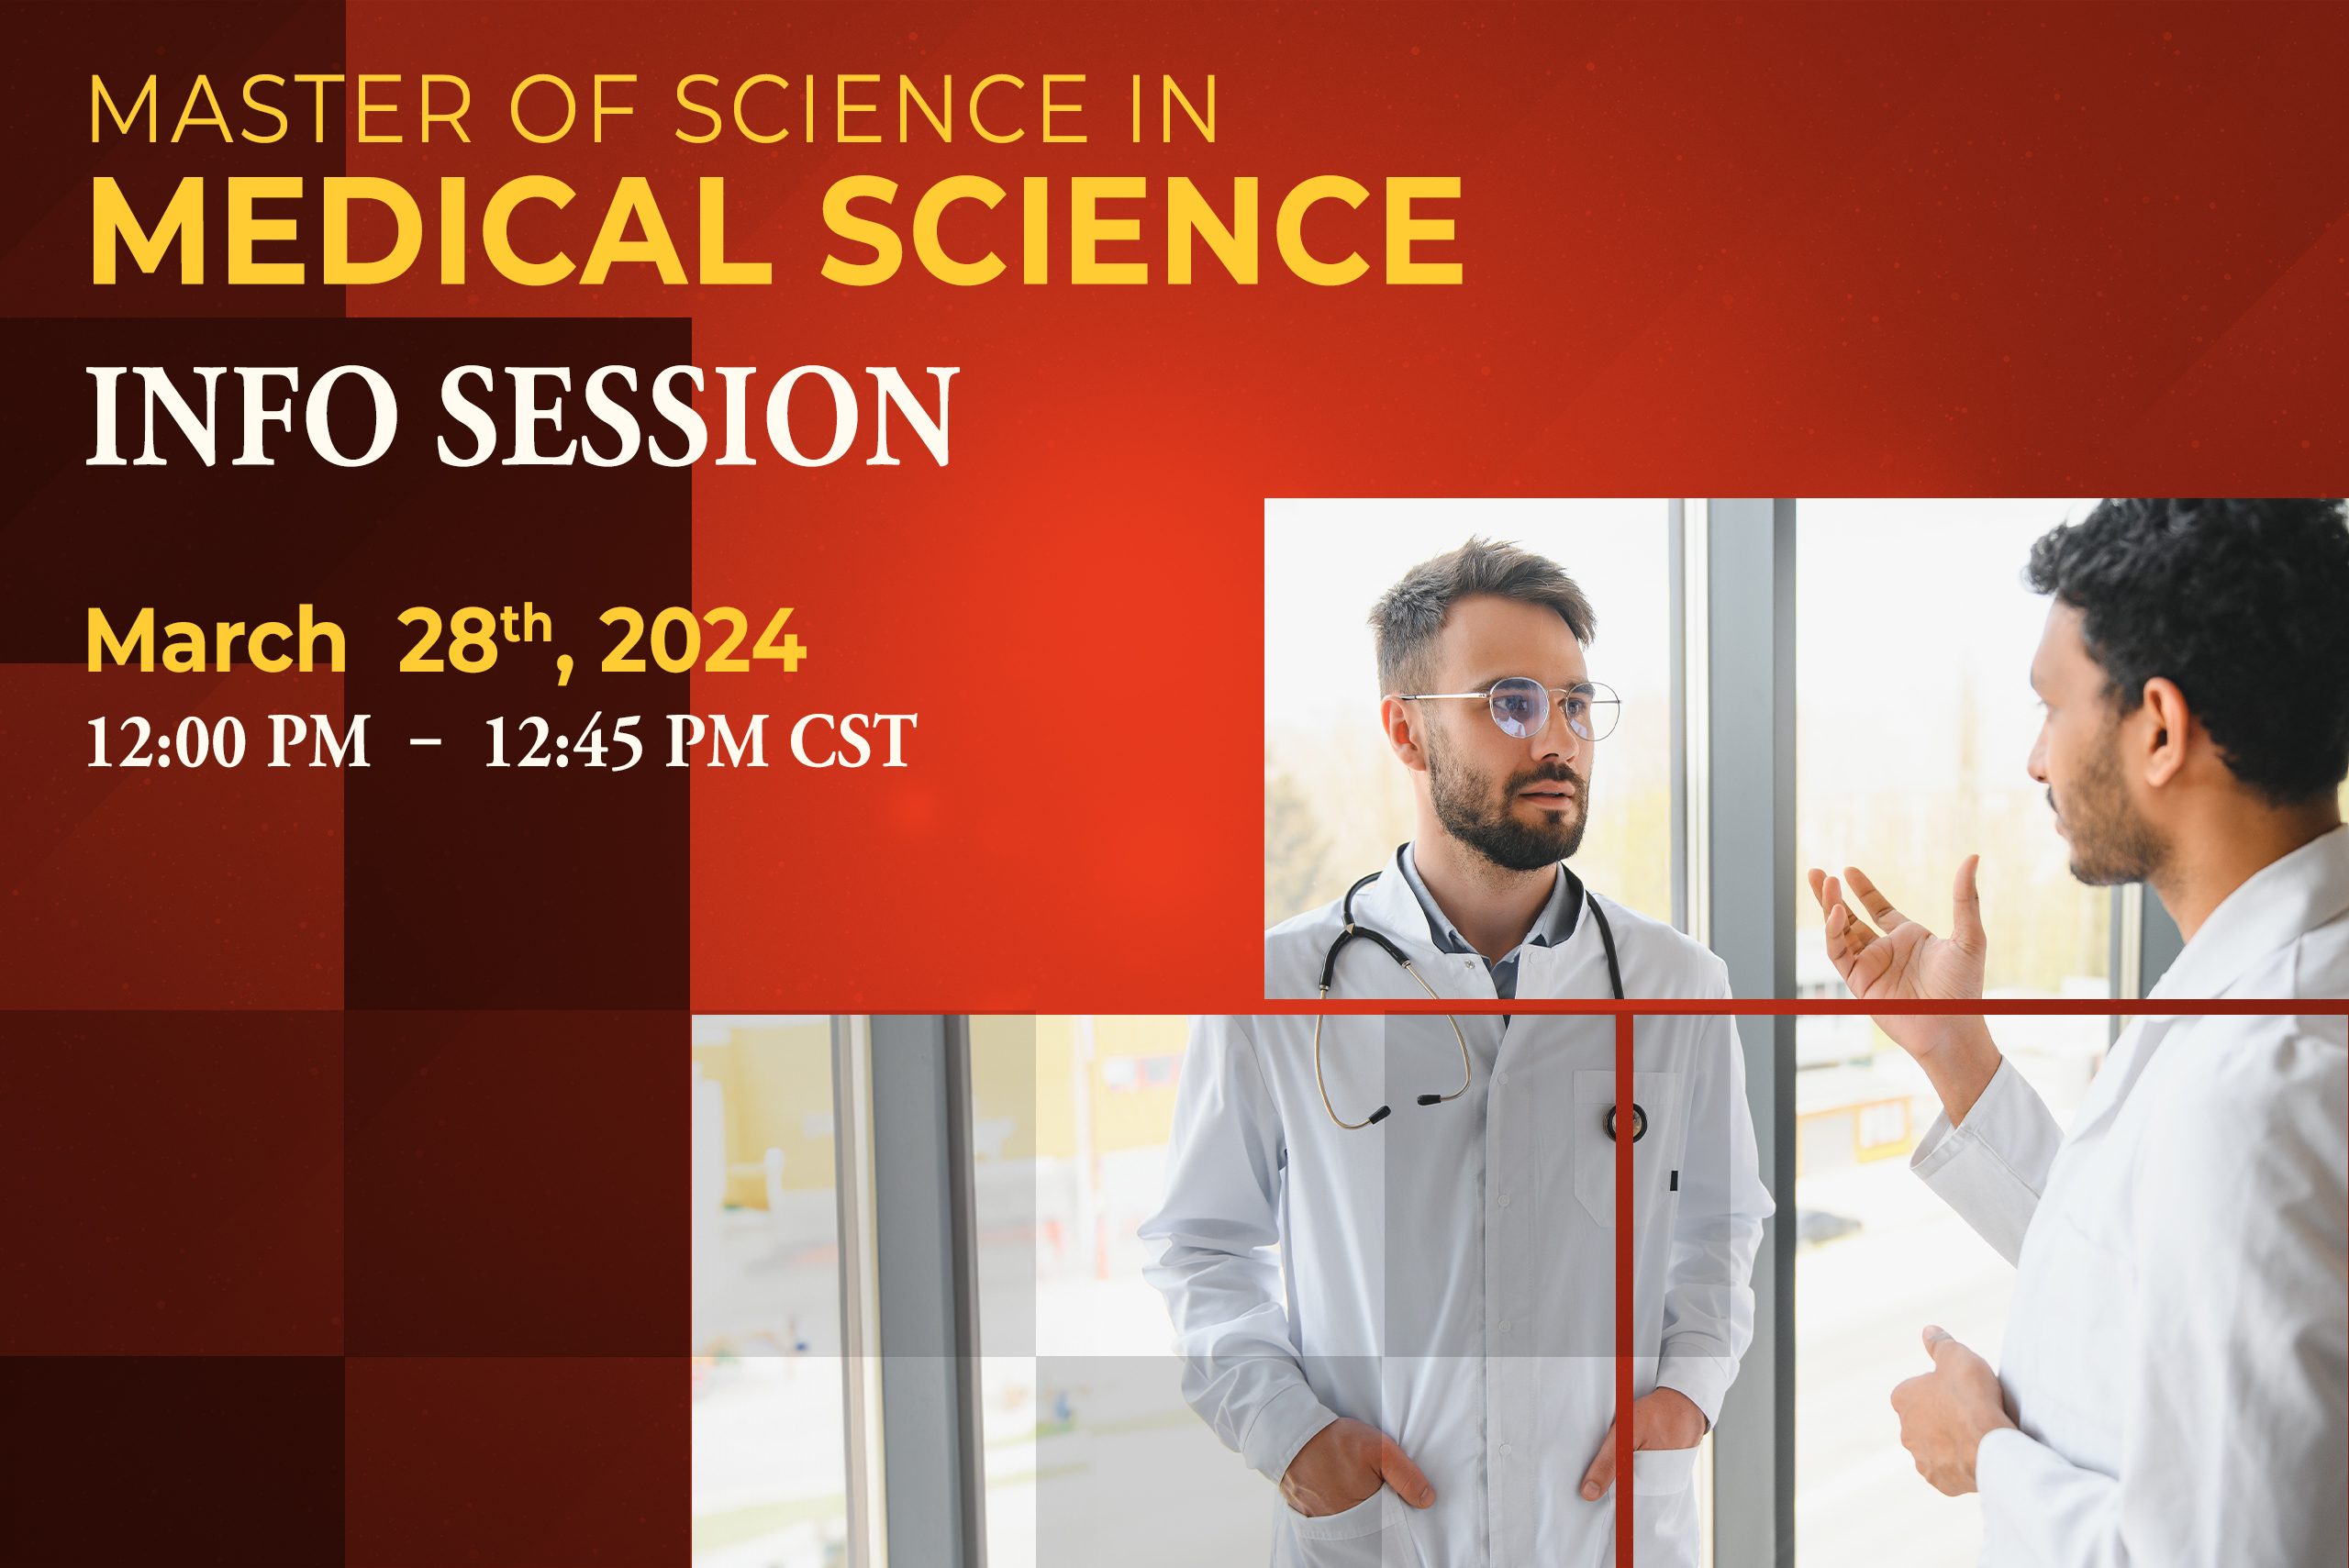 Master of Science in Medical Science Info Session march 28